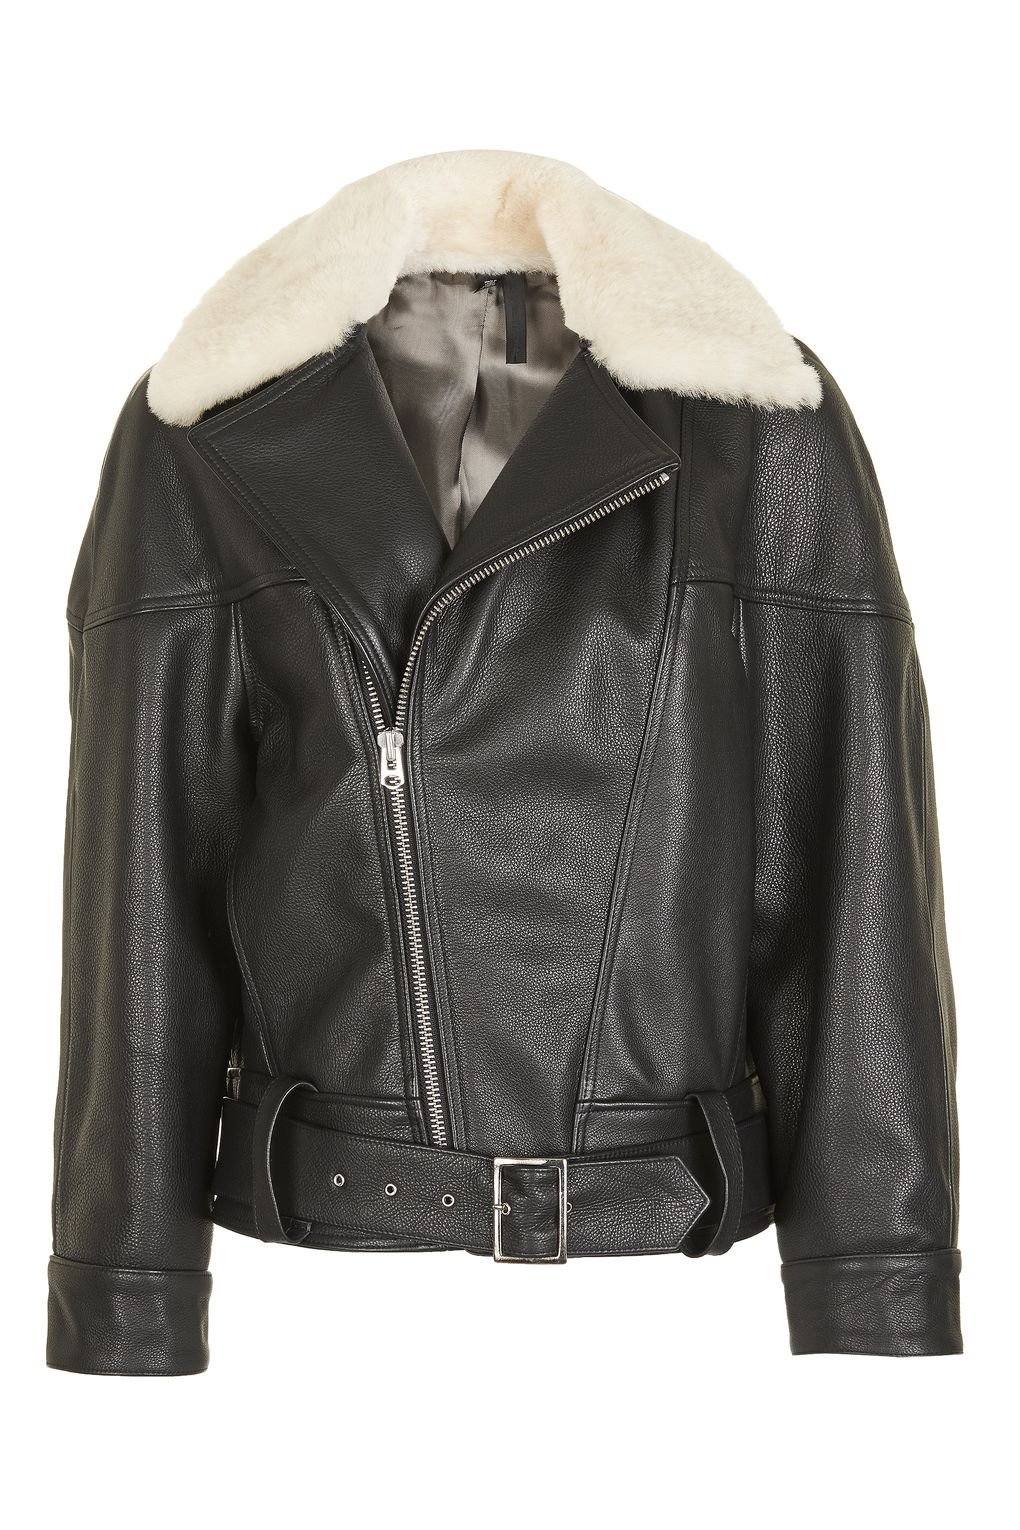 Topshop Faux Leather Aviator Jacket With Faux Shearling Trim In